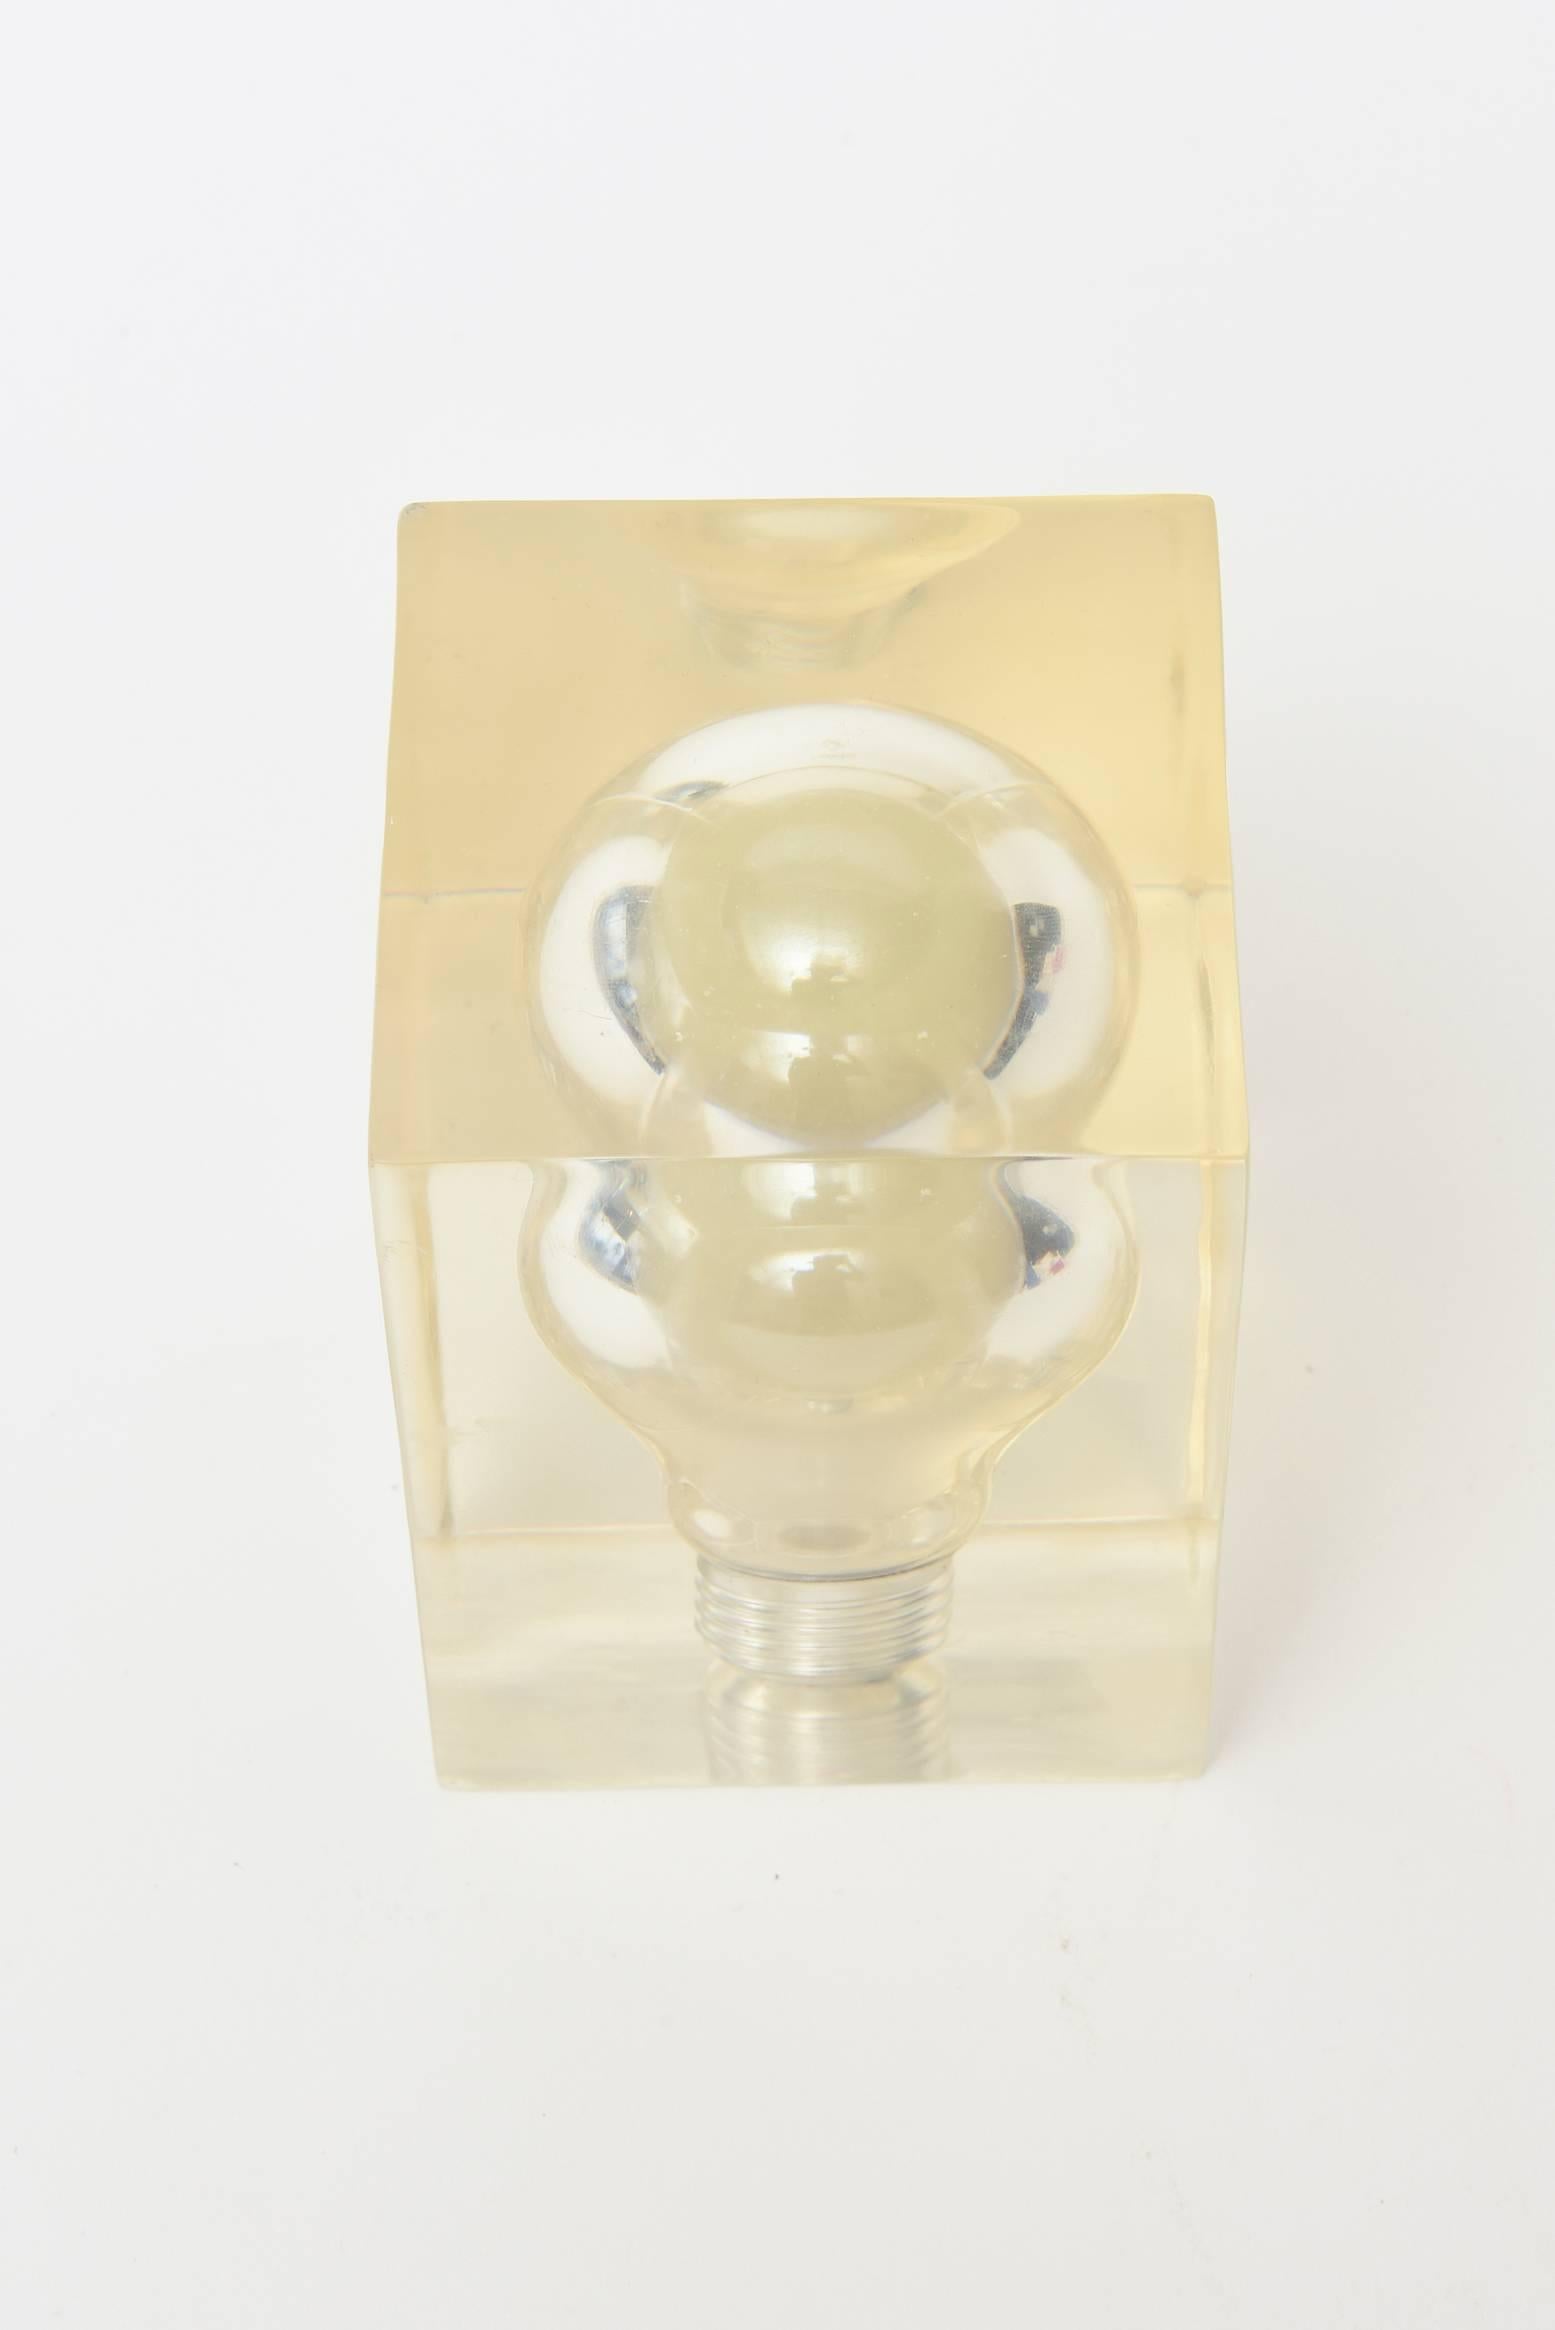 Mid-20th Century Pierre Giraudon French Pop Art Lucite Light Bulb Sculpture/ Paperweight /SALE